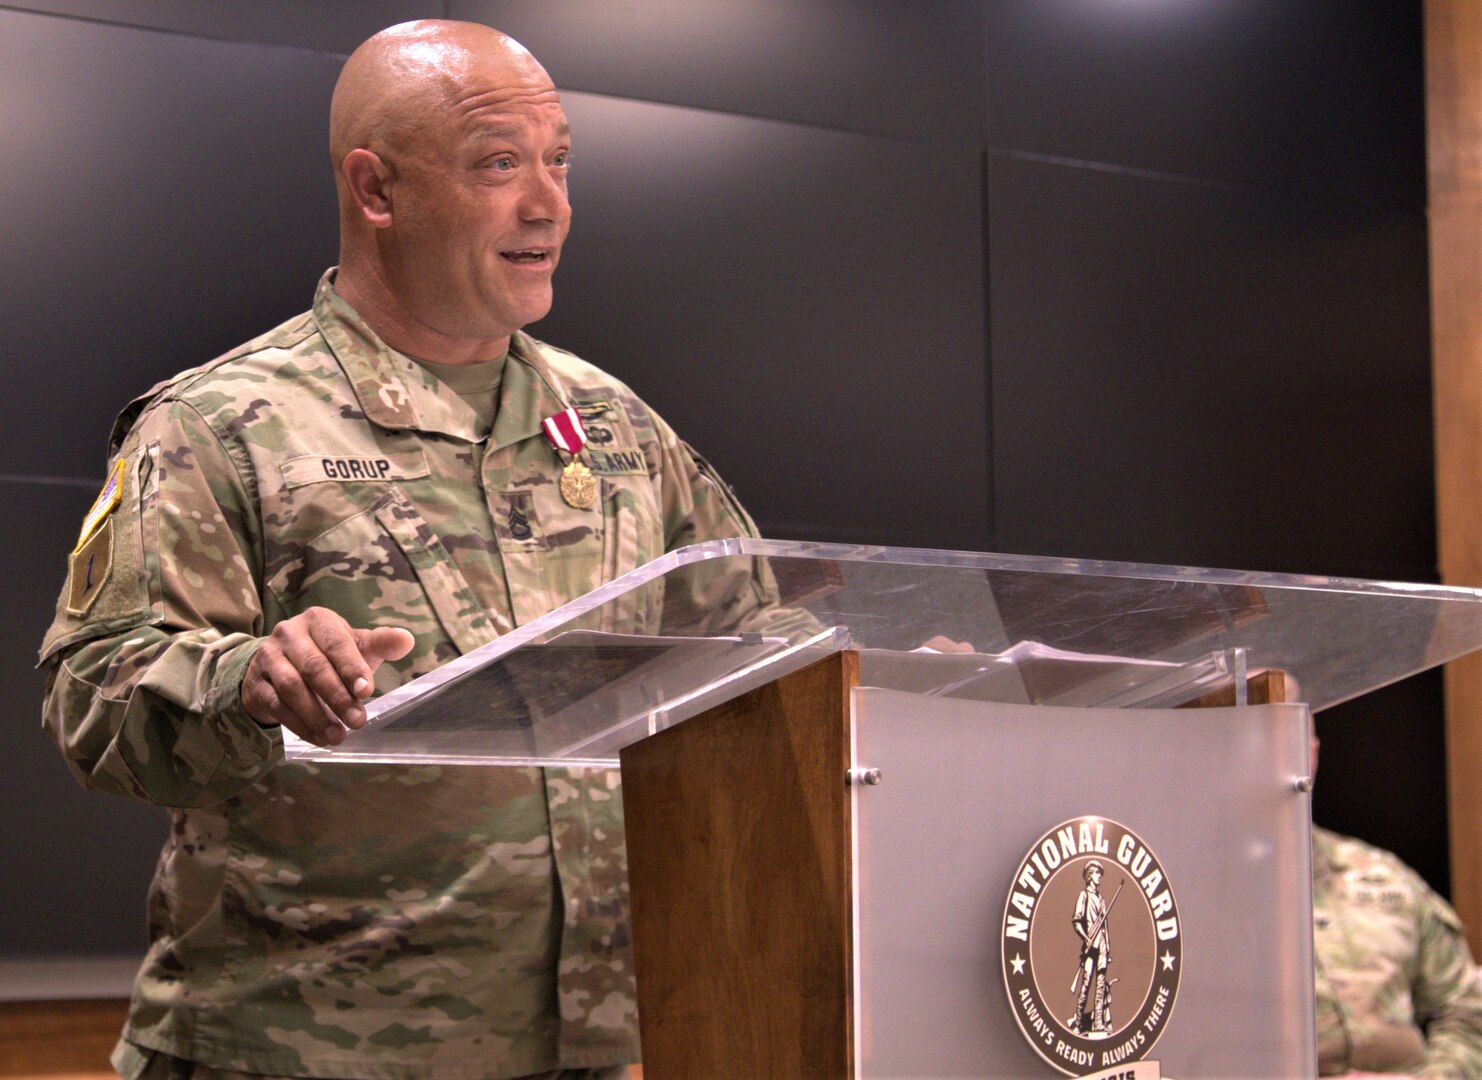 Illinois Army National Guard Sgt. 1st Class Anthony Gorup, the Noncommissioned Officer-Charge of the Illinois National Guard's Joint Operations Center, retired with almost 26 years of service on Sunday, May 15, during a ceremony on Camp Lincoln in Springfield.